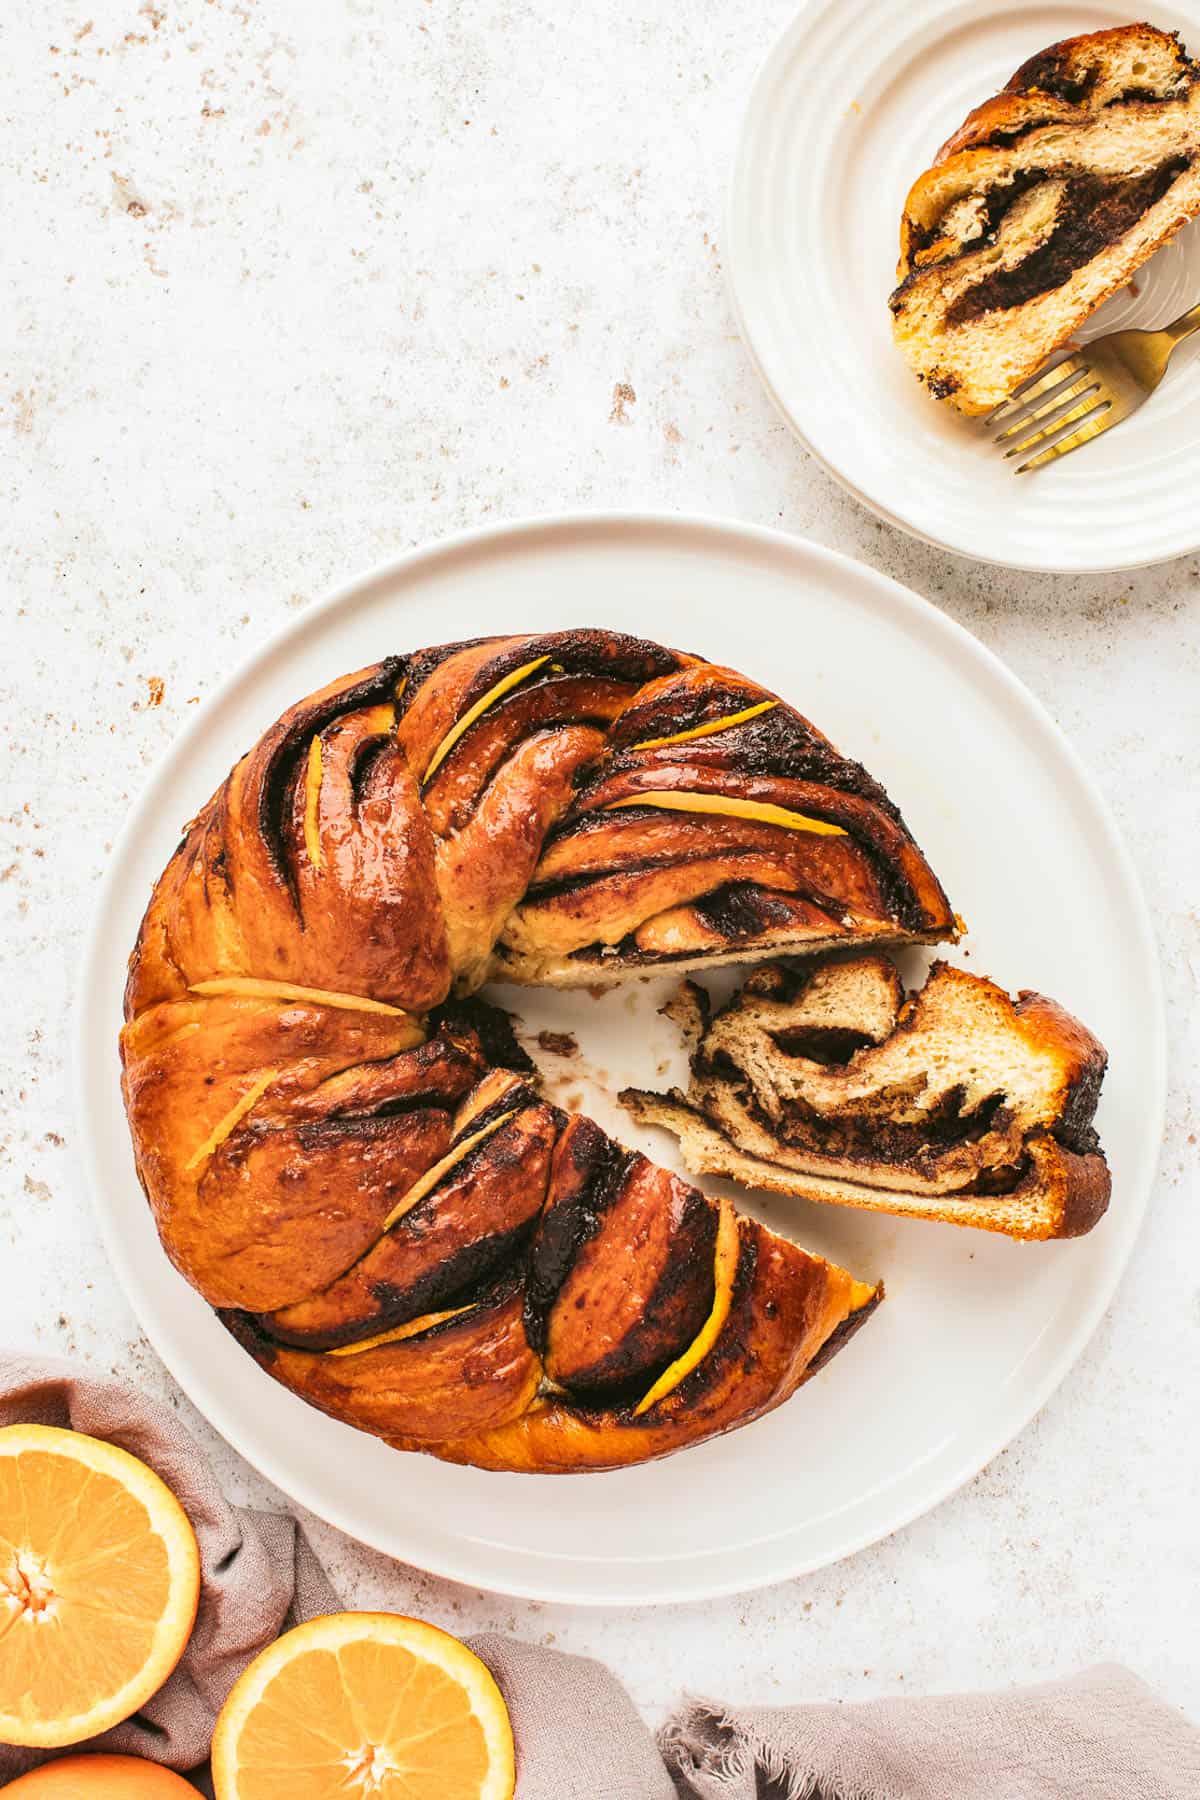 overhead shot of an orange chocolate babka wreath with a wedge taken out and turned on its side so that you can see the swirls of chocolate inside.